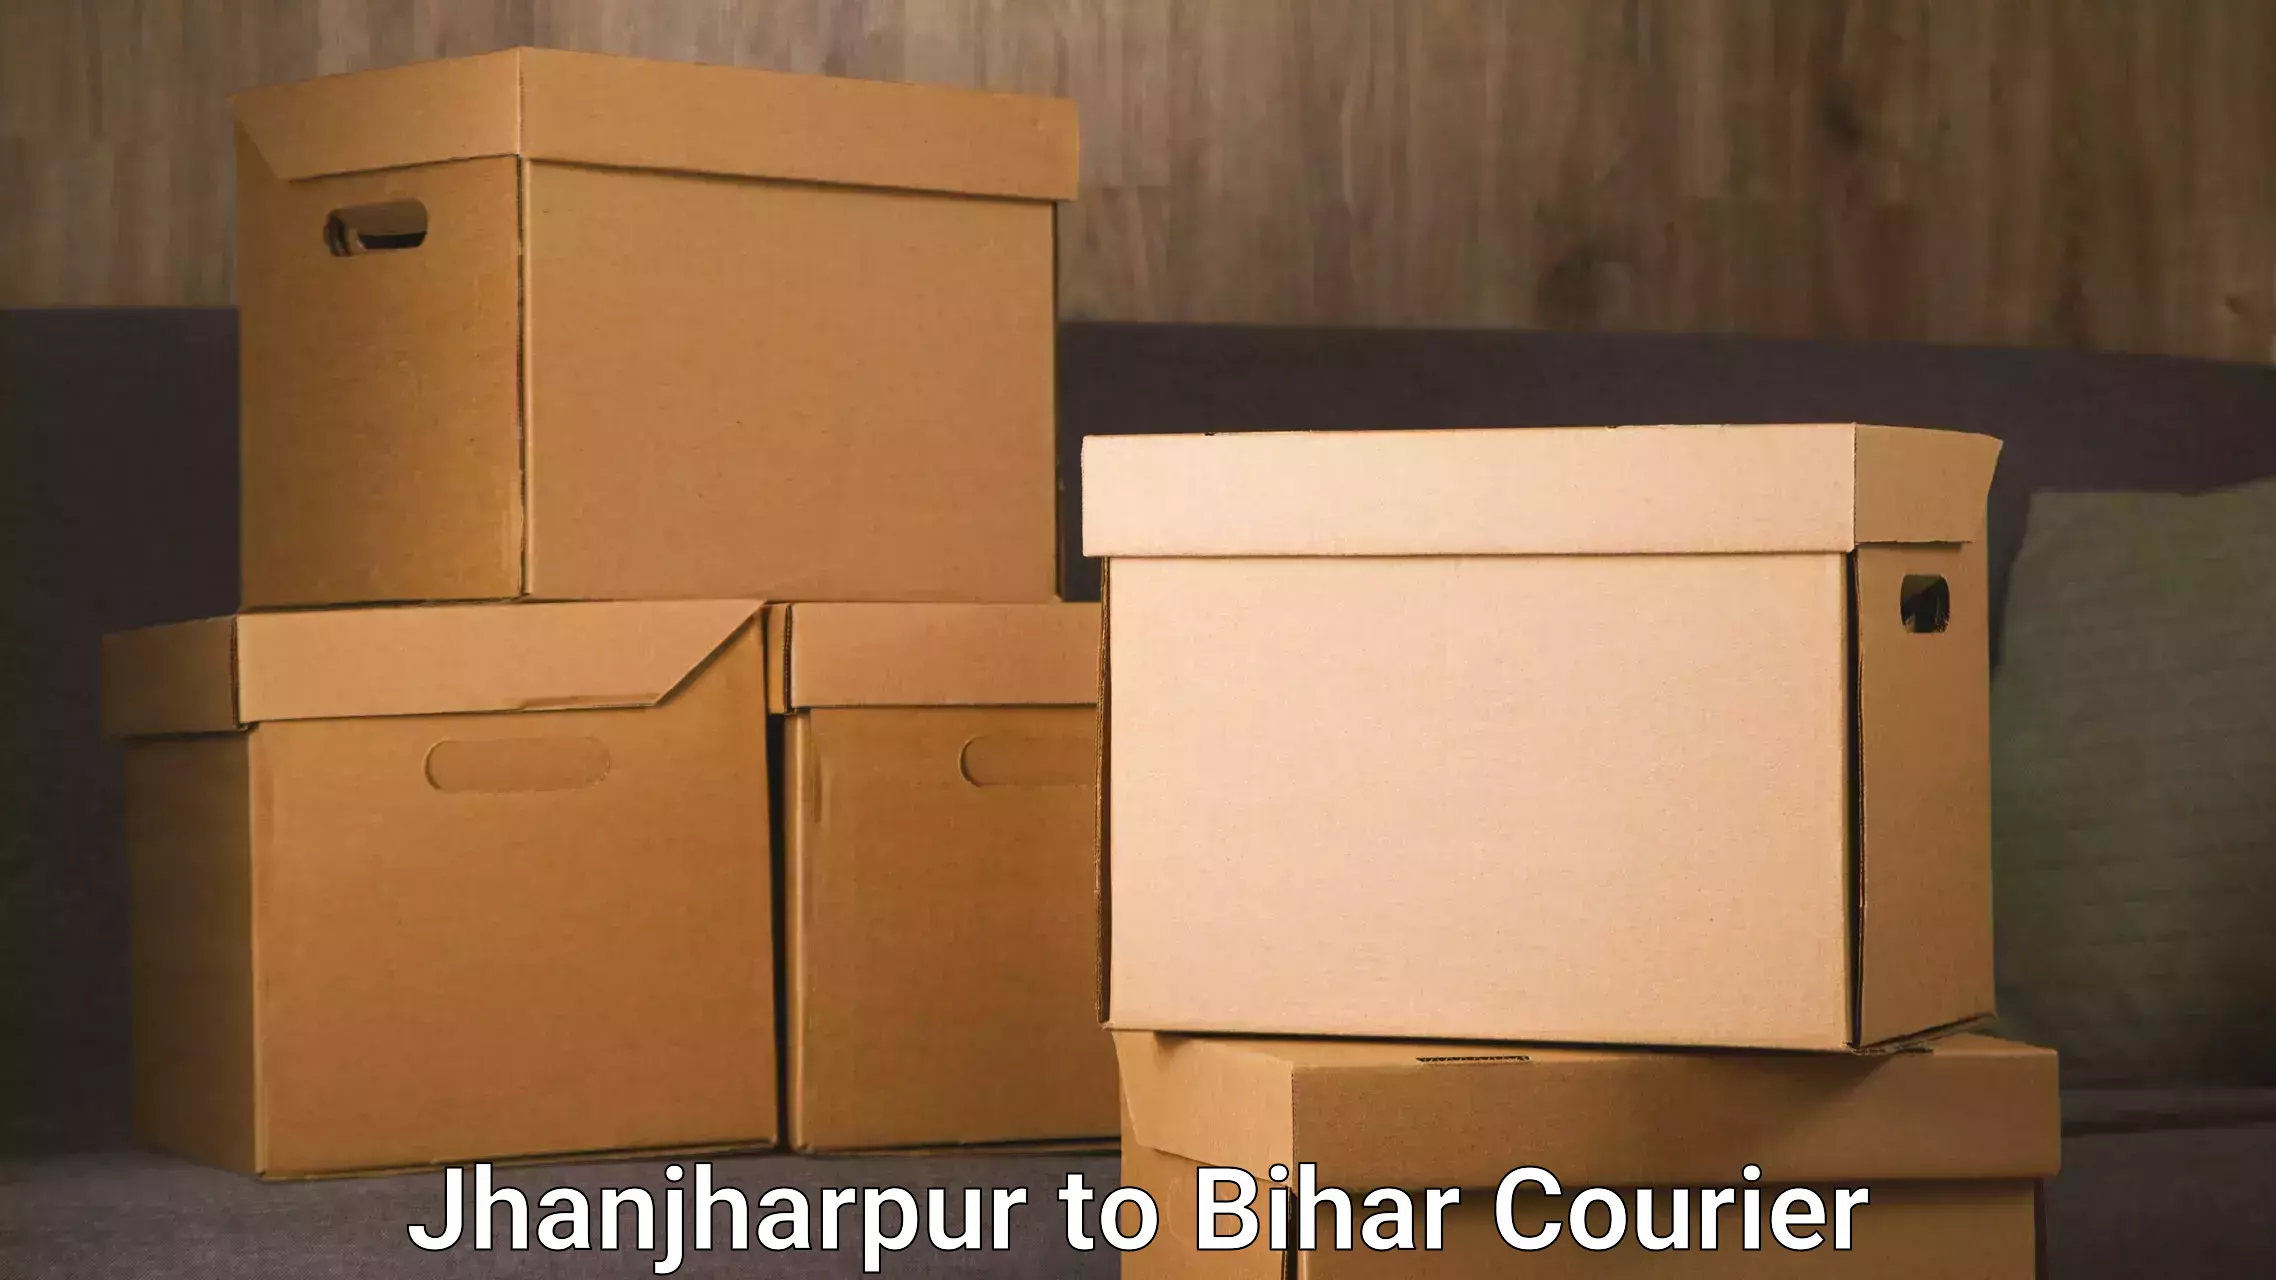 Moving and storage services Jhanjharpur to Patna